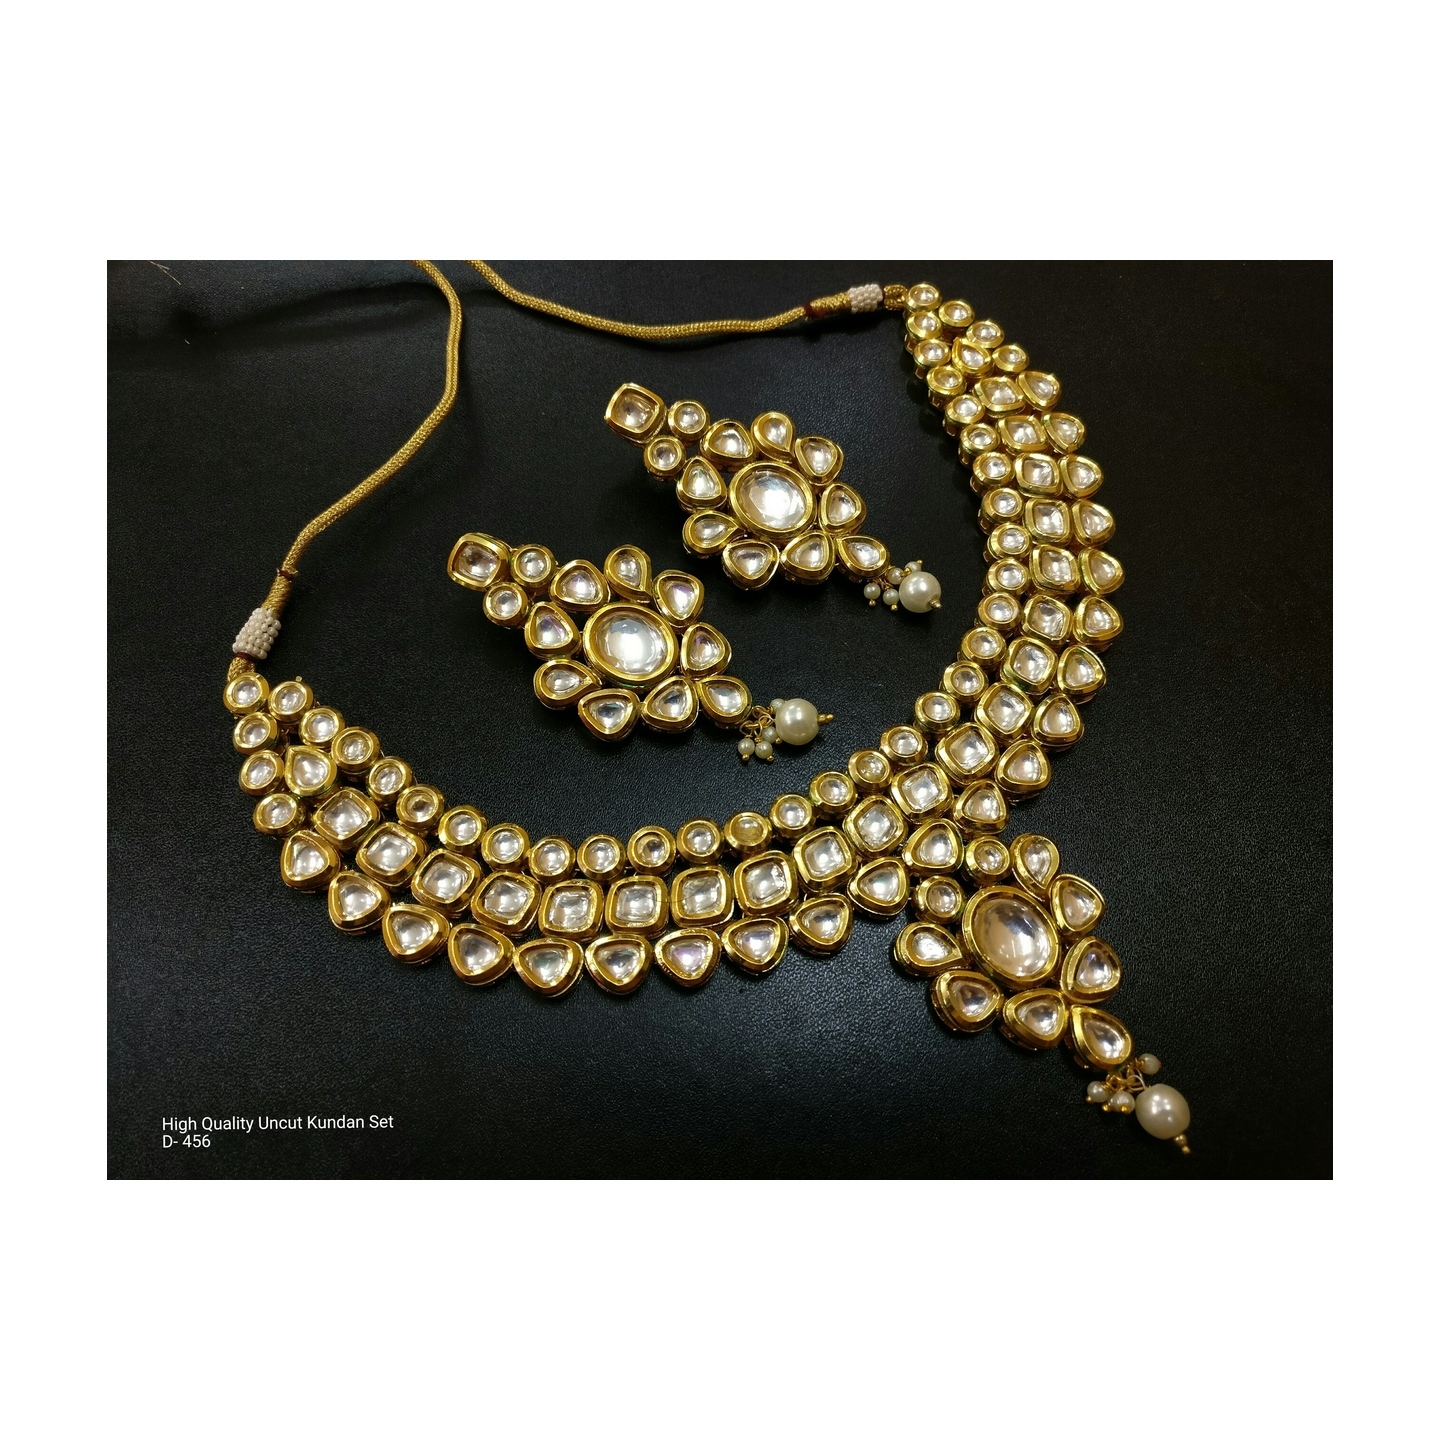 High Quality Kundan Necklace Set With Earring